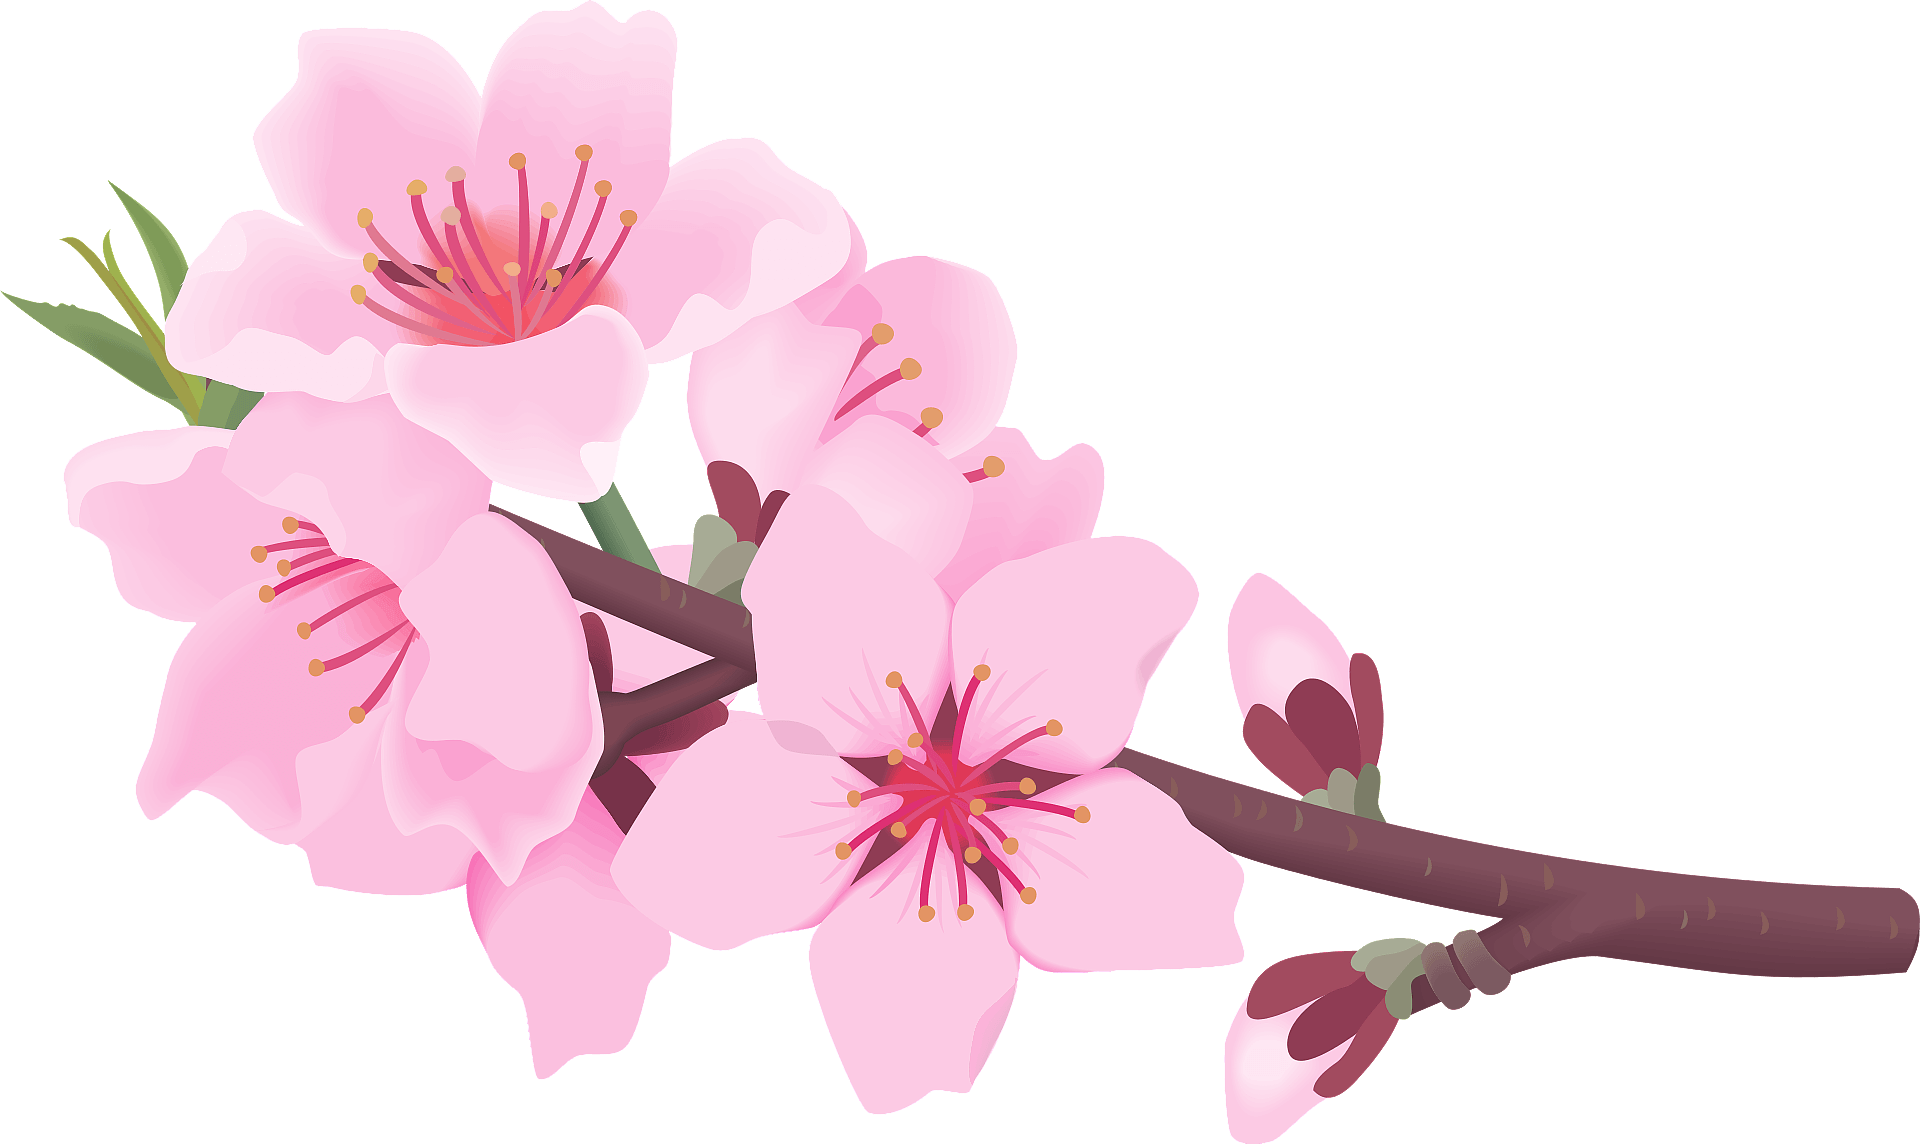 Peach blossoms clipart. Free download transparent .PNG Clipart Library ...